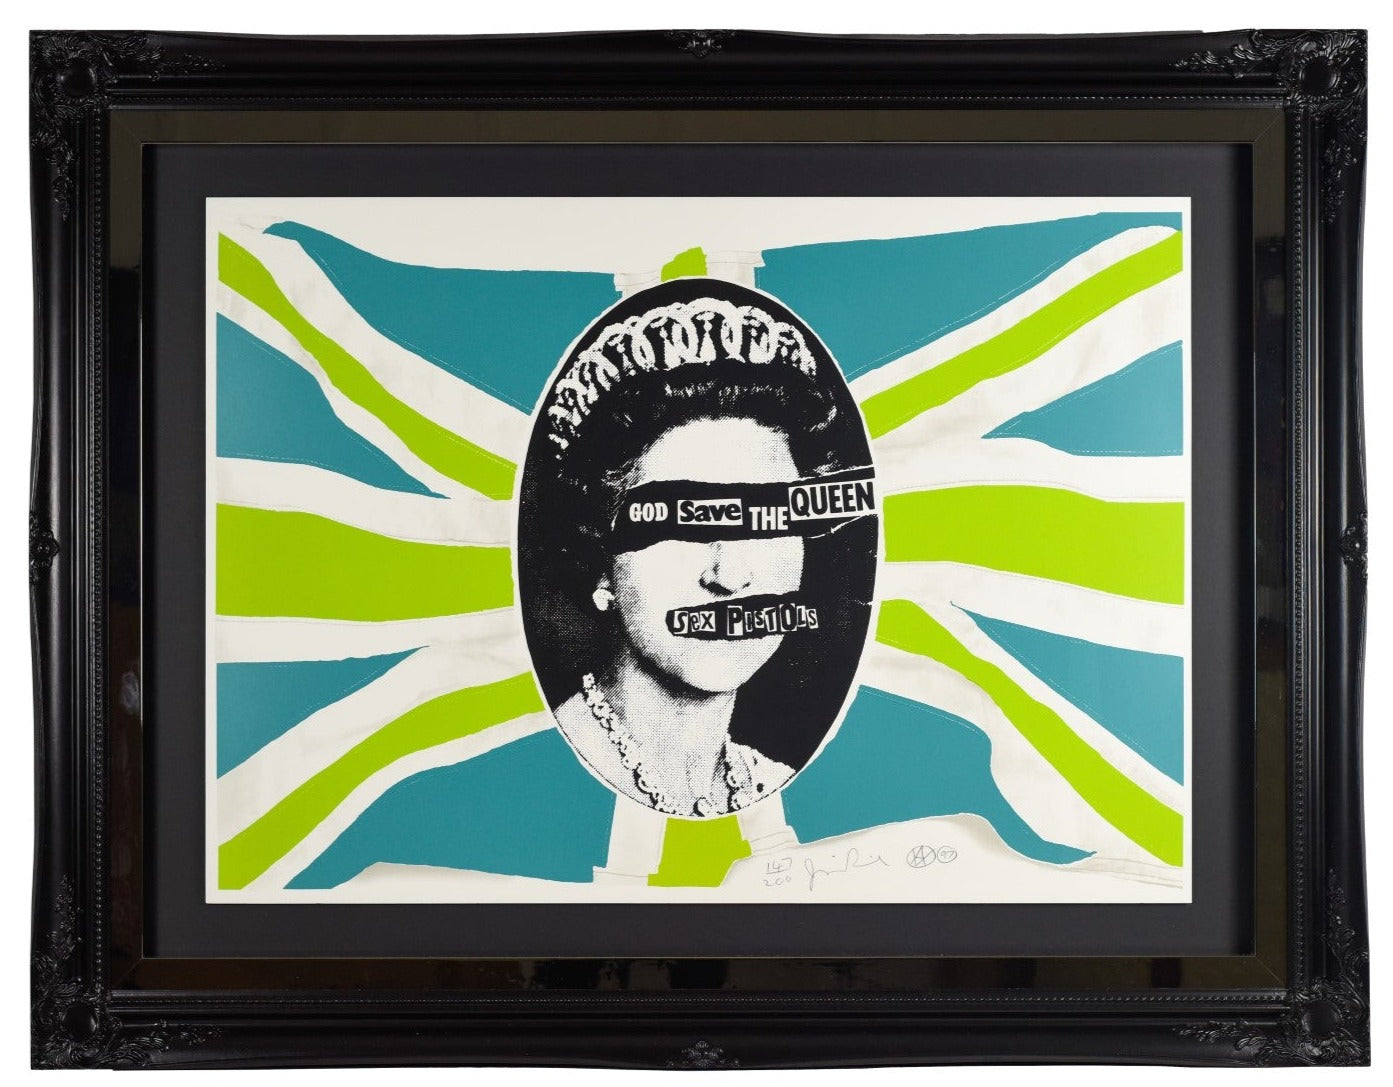 God Save the Queen - Lime Green Colourway (Green Flag)